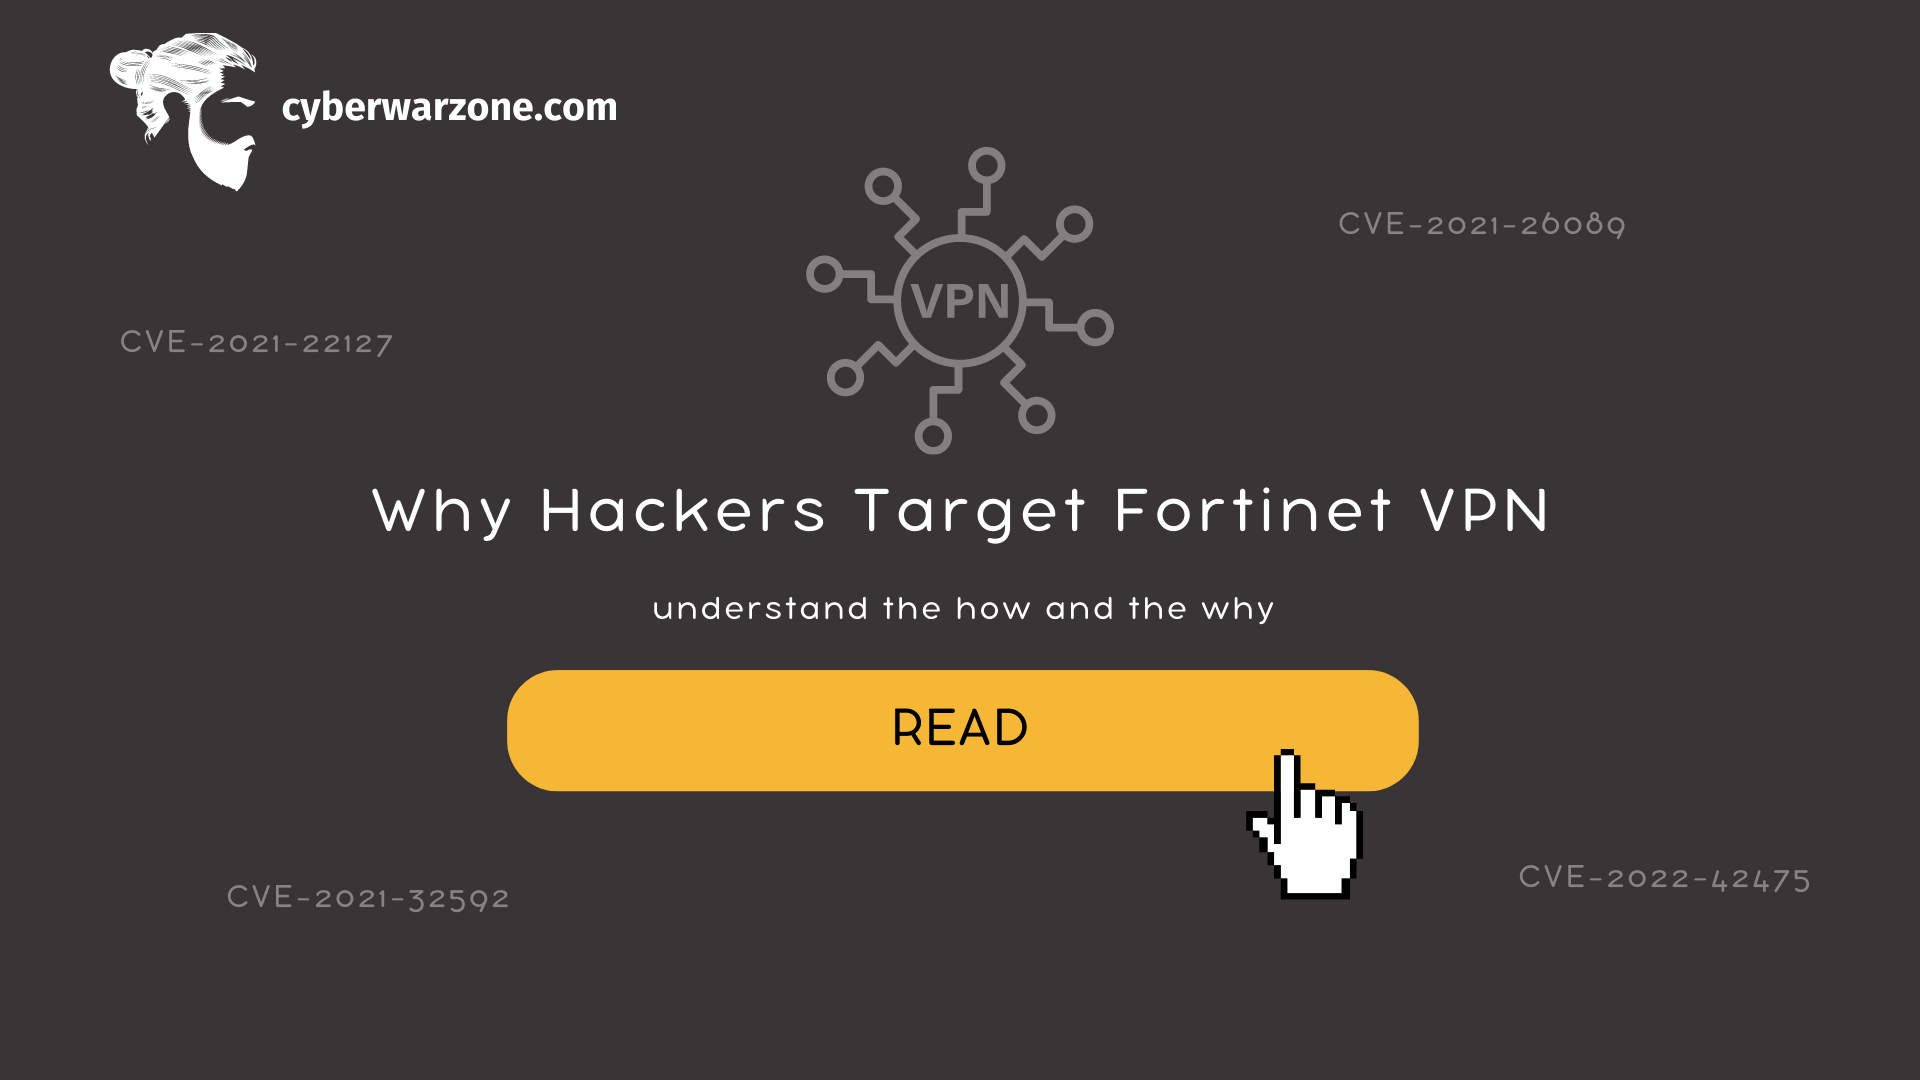 Why Hackers Target Fortinet VPN